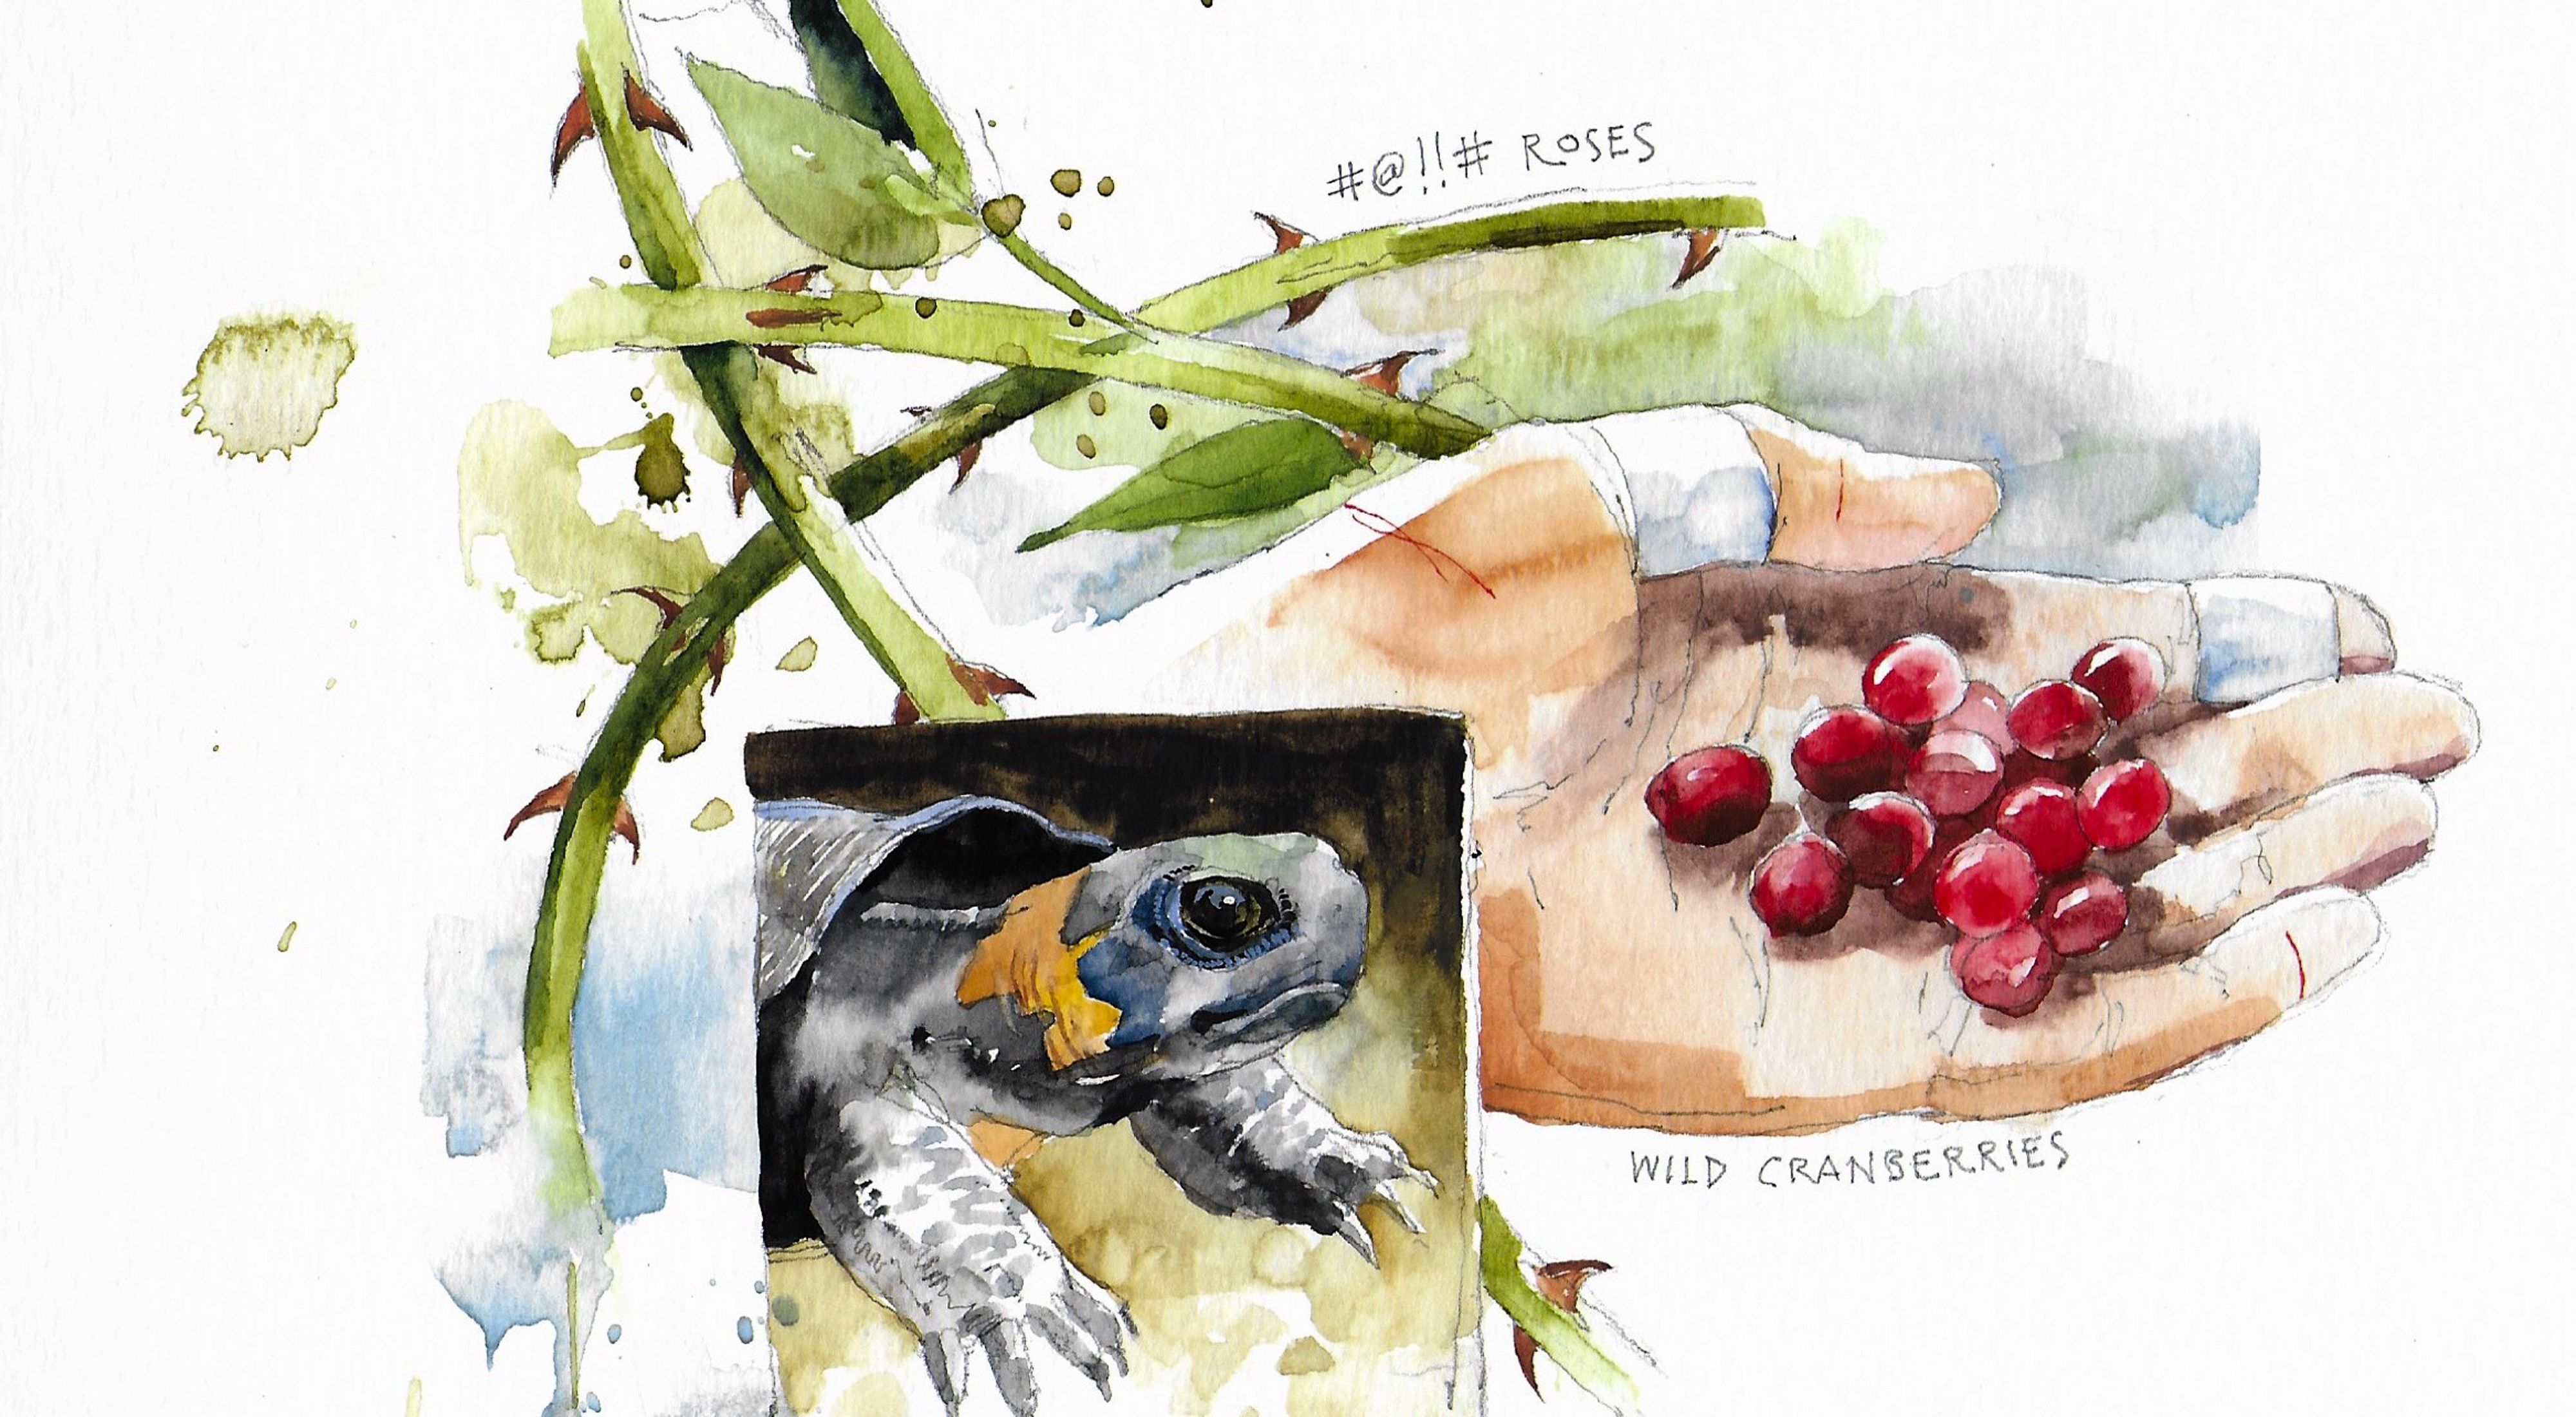 An illustration shows thorns, berries and a turtle from a Tennessee bog